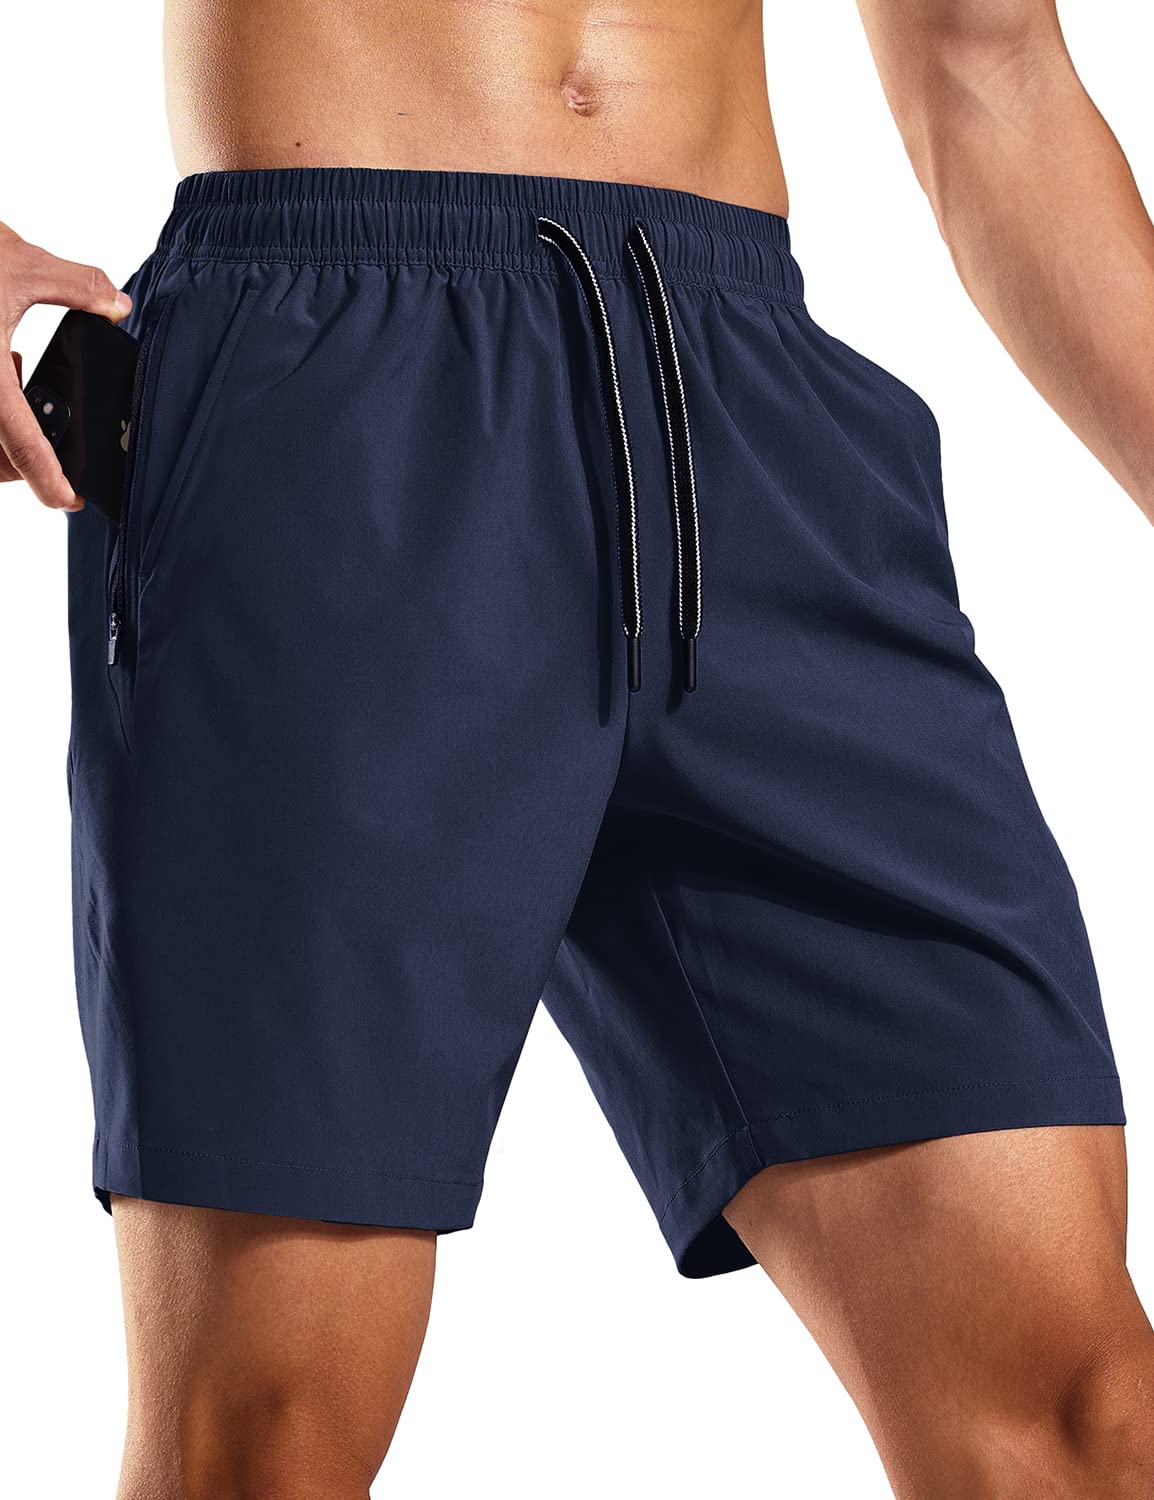 MIER Men Ultra-Soft Athletic Running Shorts with Pockets